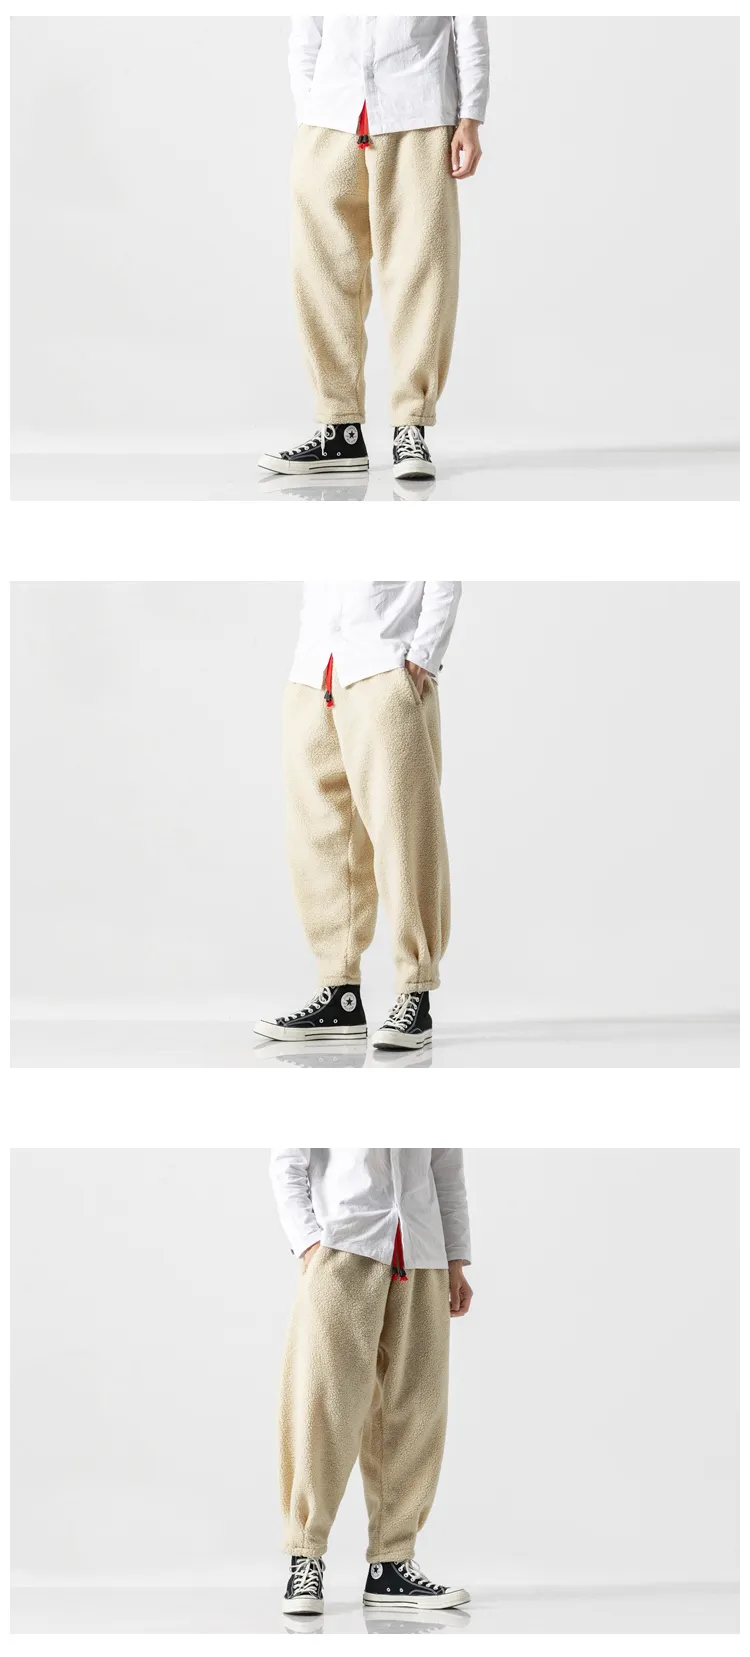 Chinese Style Embroidered Mens Fleece Harem Pants Men Warm Lamb Wool Harem  Harem Pants Men For Autumn/Winter Plus Size Baggy Joggers For Fashionable  Casual Wear Style #220922 From Long01, $37.66